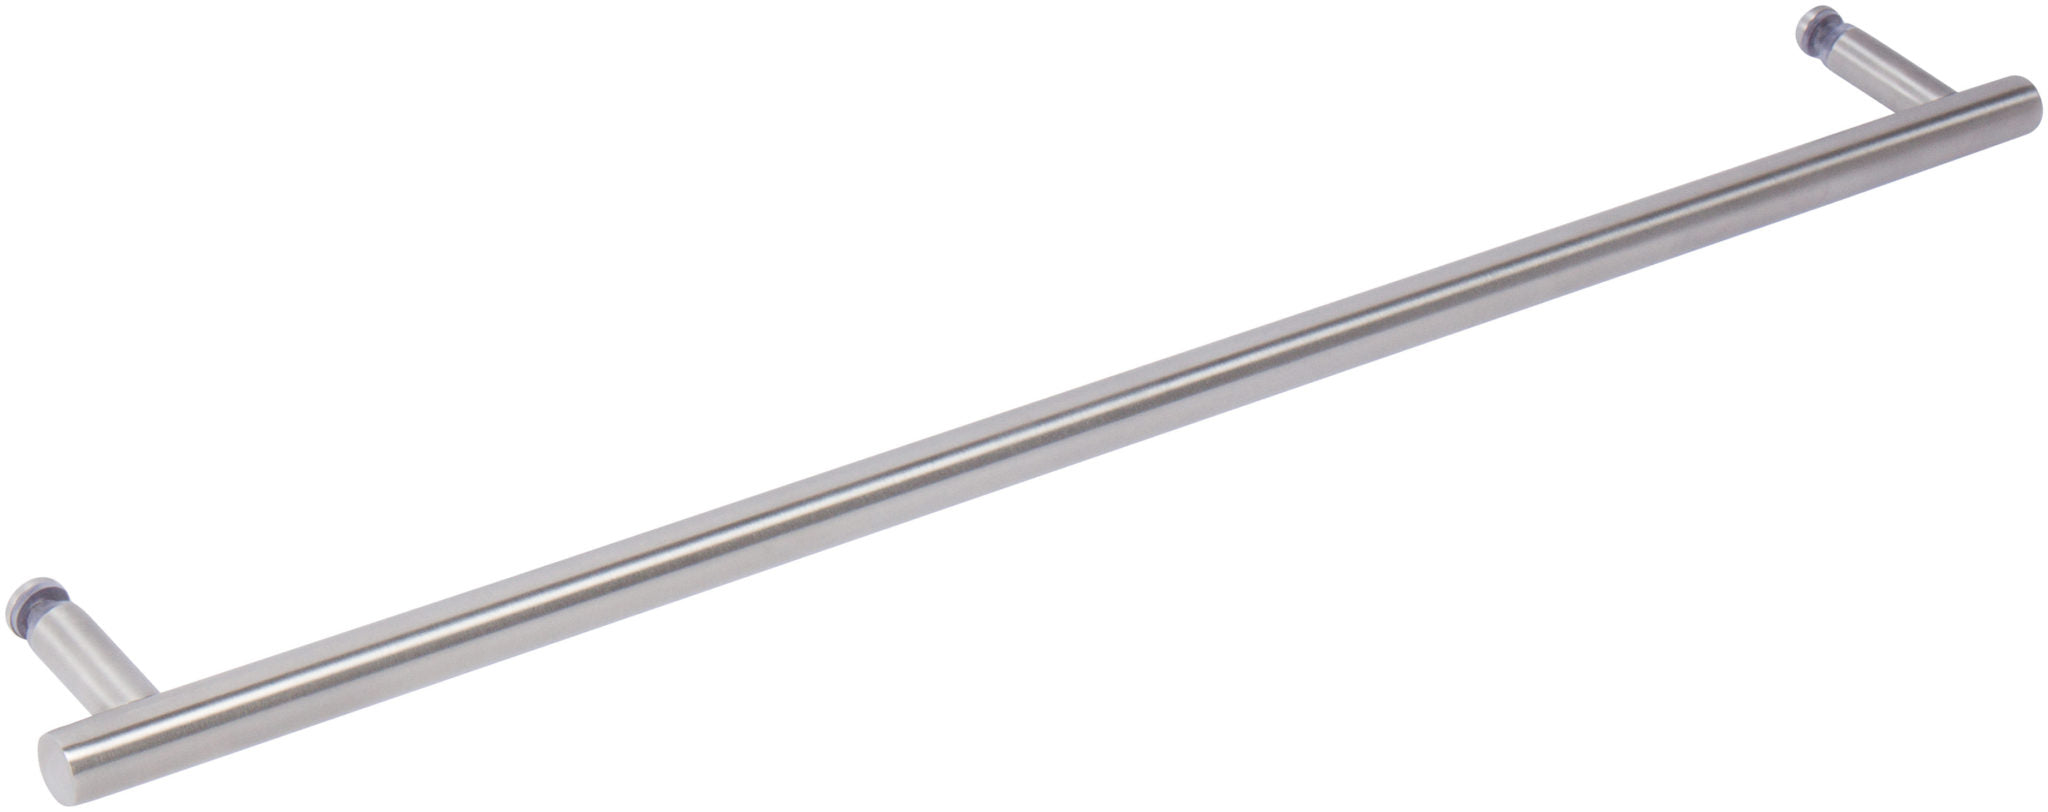 Rockwell Ladder Type Single Side Towel Bar for Glass Shower Doors with 1/2" Hole Diameter